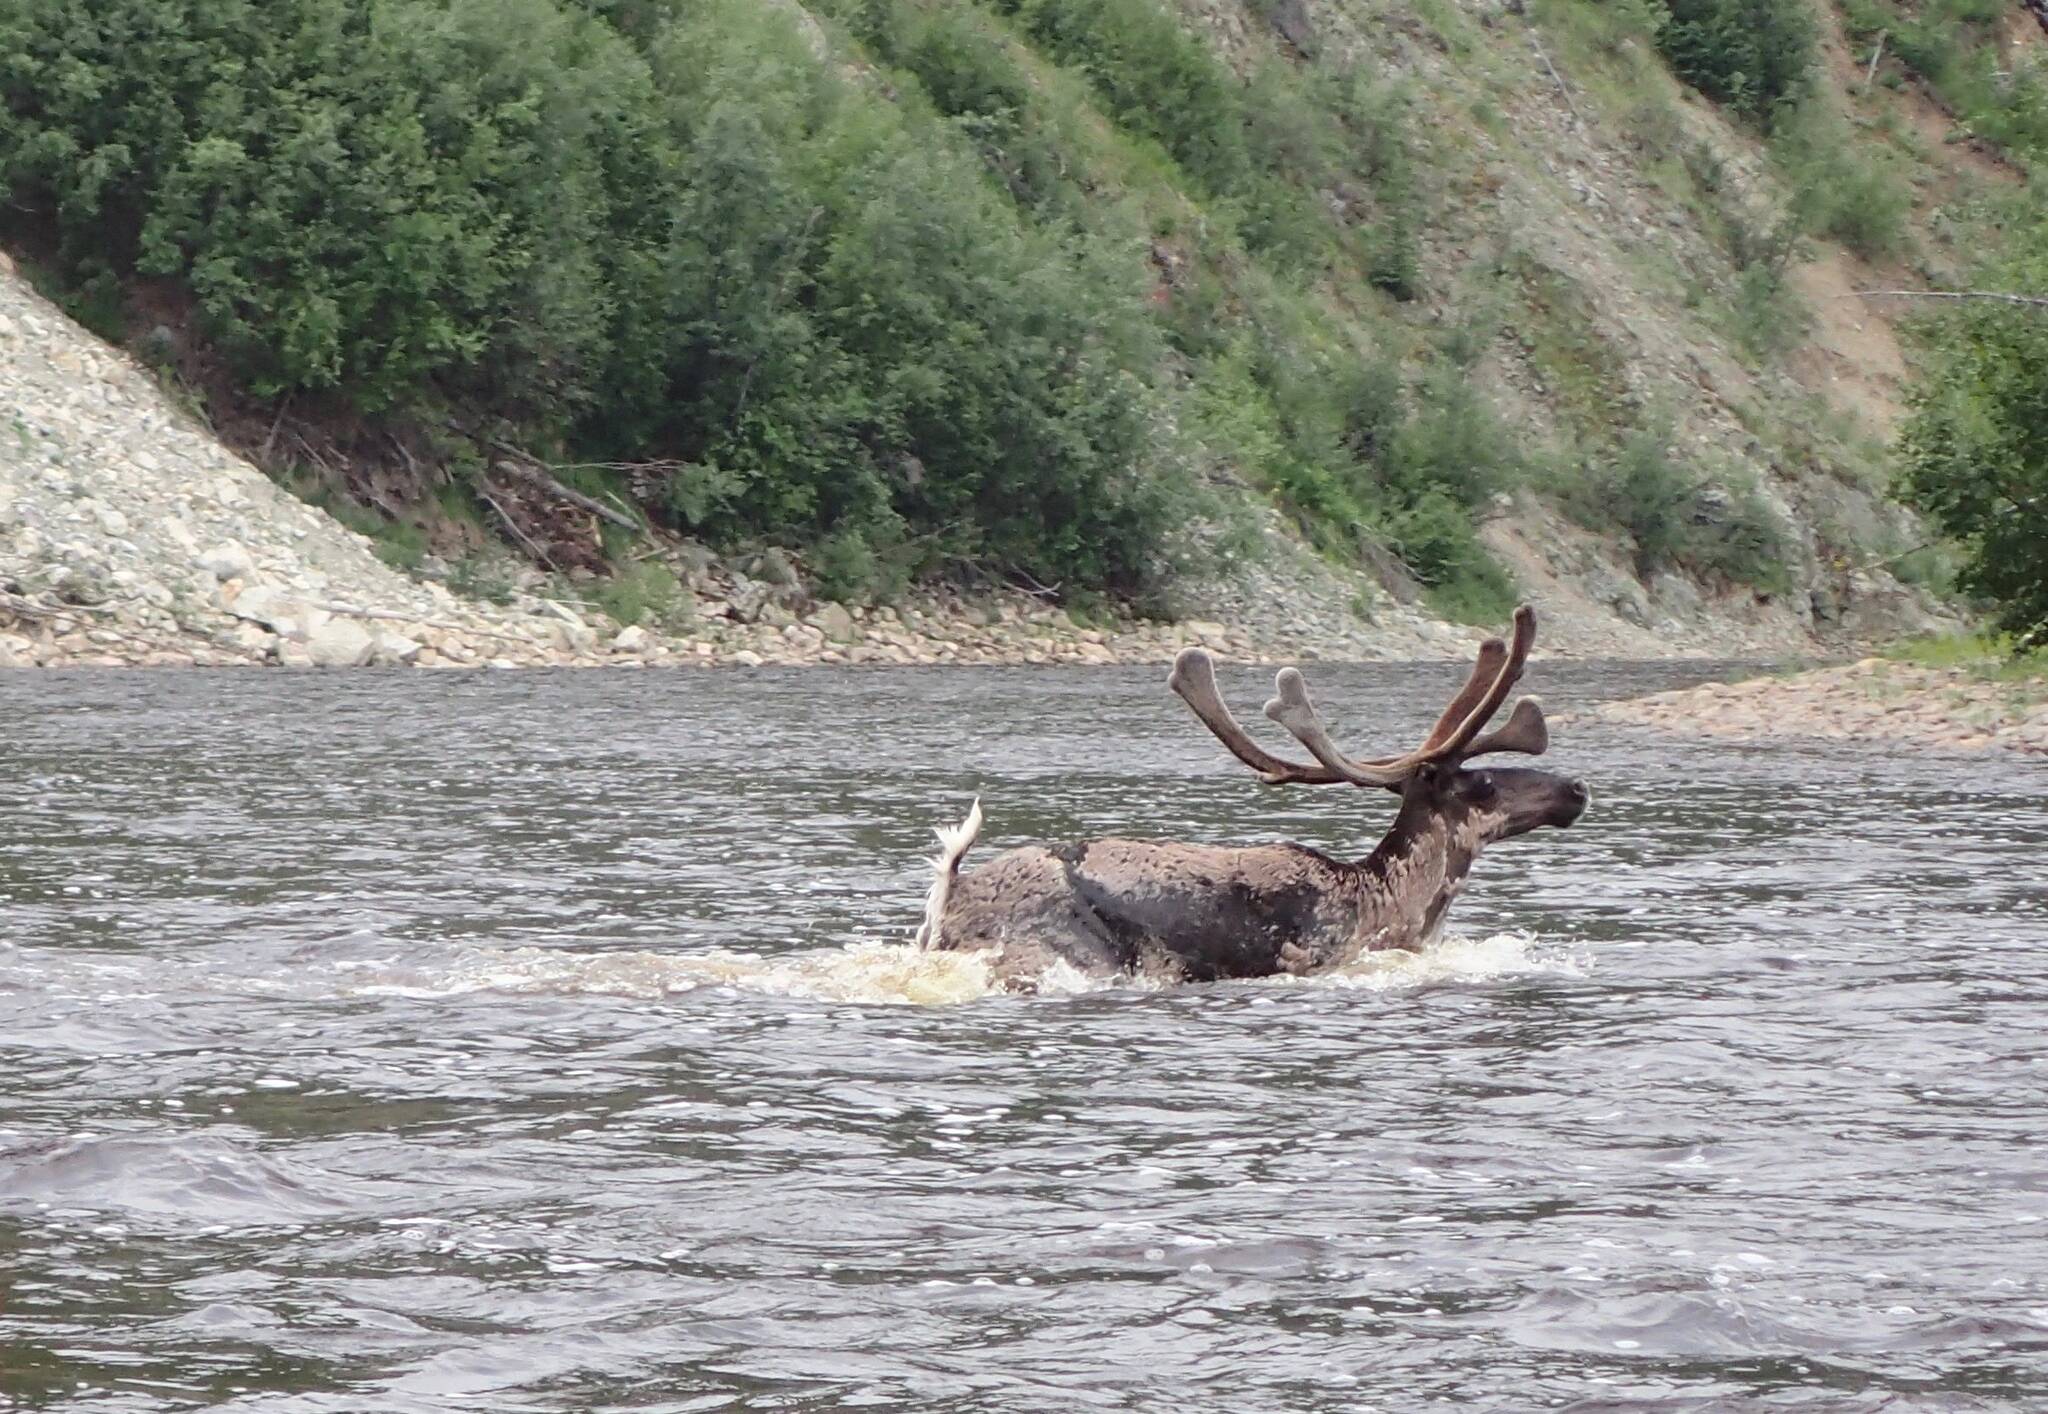 A caribou swims across the Fortymile River in Interior Alaska in 2018. (Courtesy Photo / Ned Rozell)